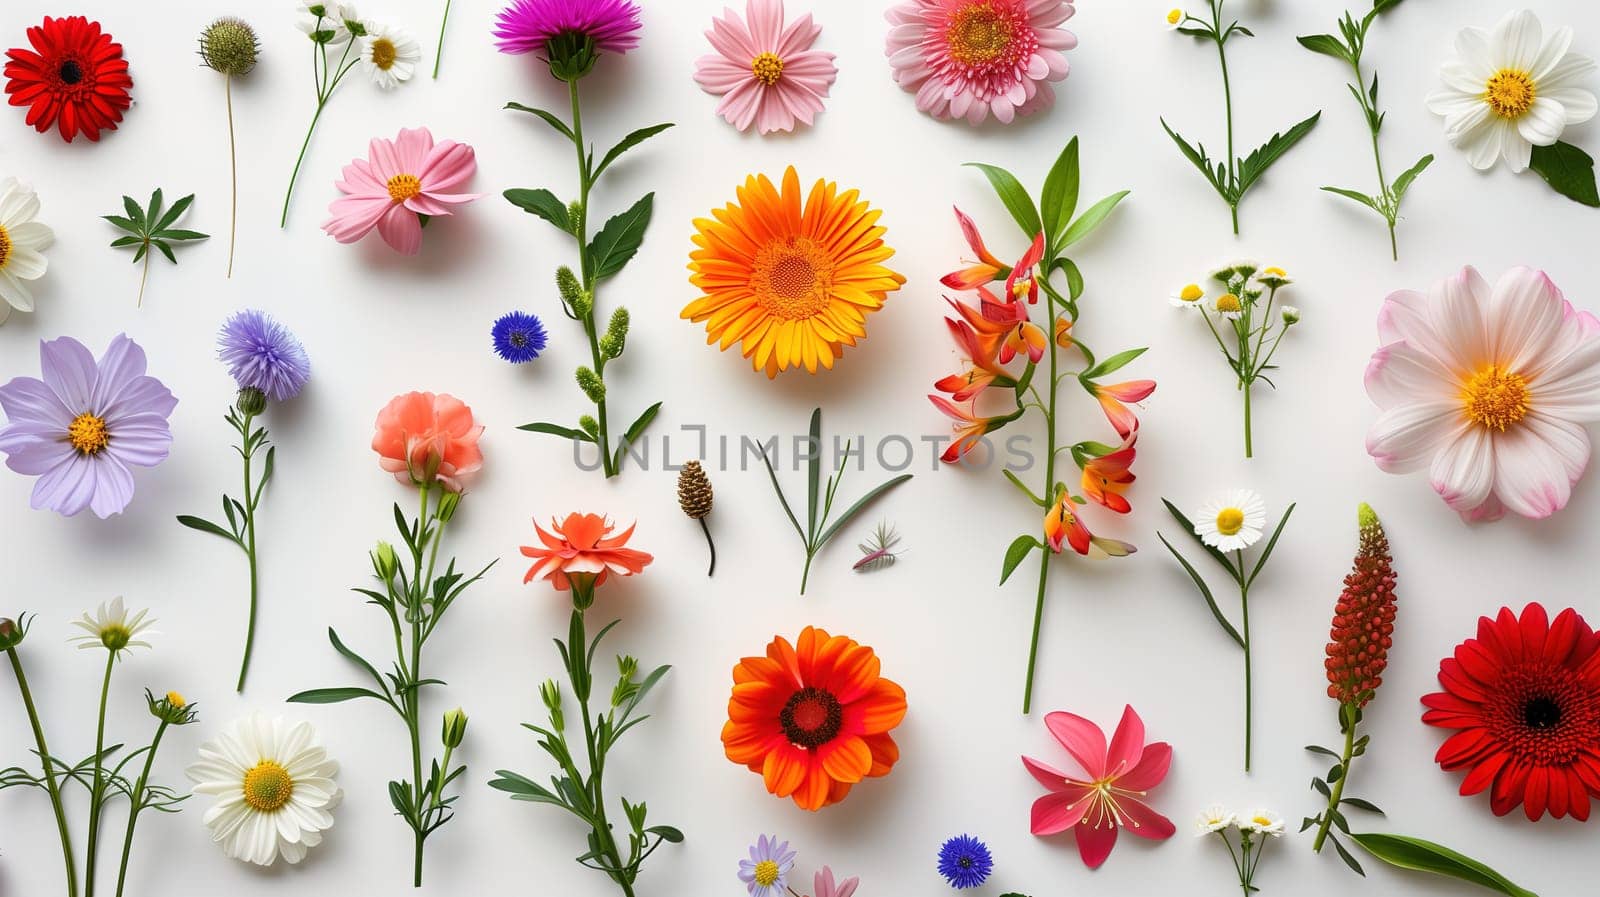 A collection of various vibrant colored flowers spread out on a clean white surface, creating a colorful and lively display. Each flower is unique in color and shape, adding diversity to the composition.